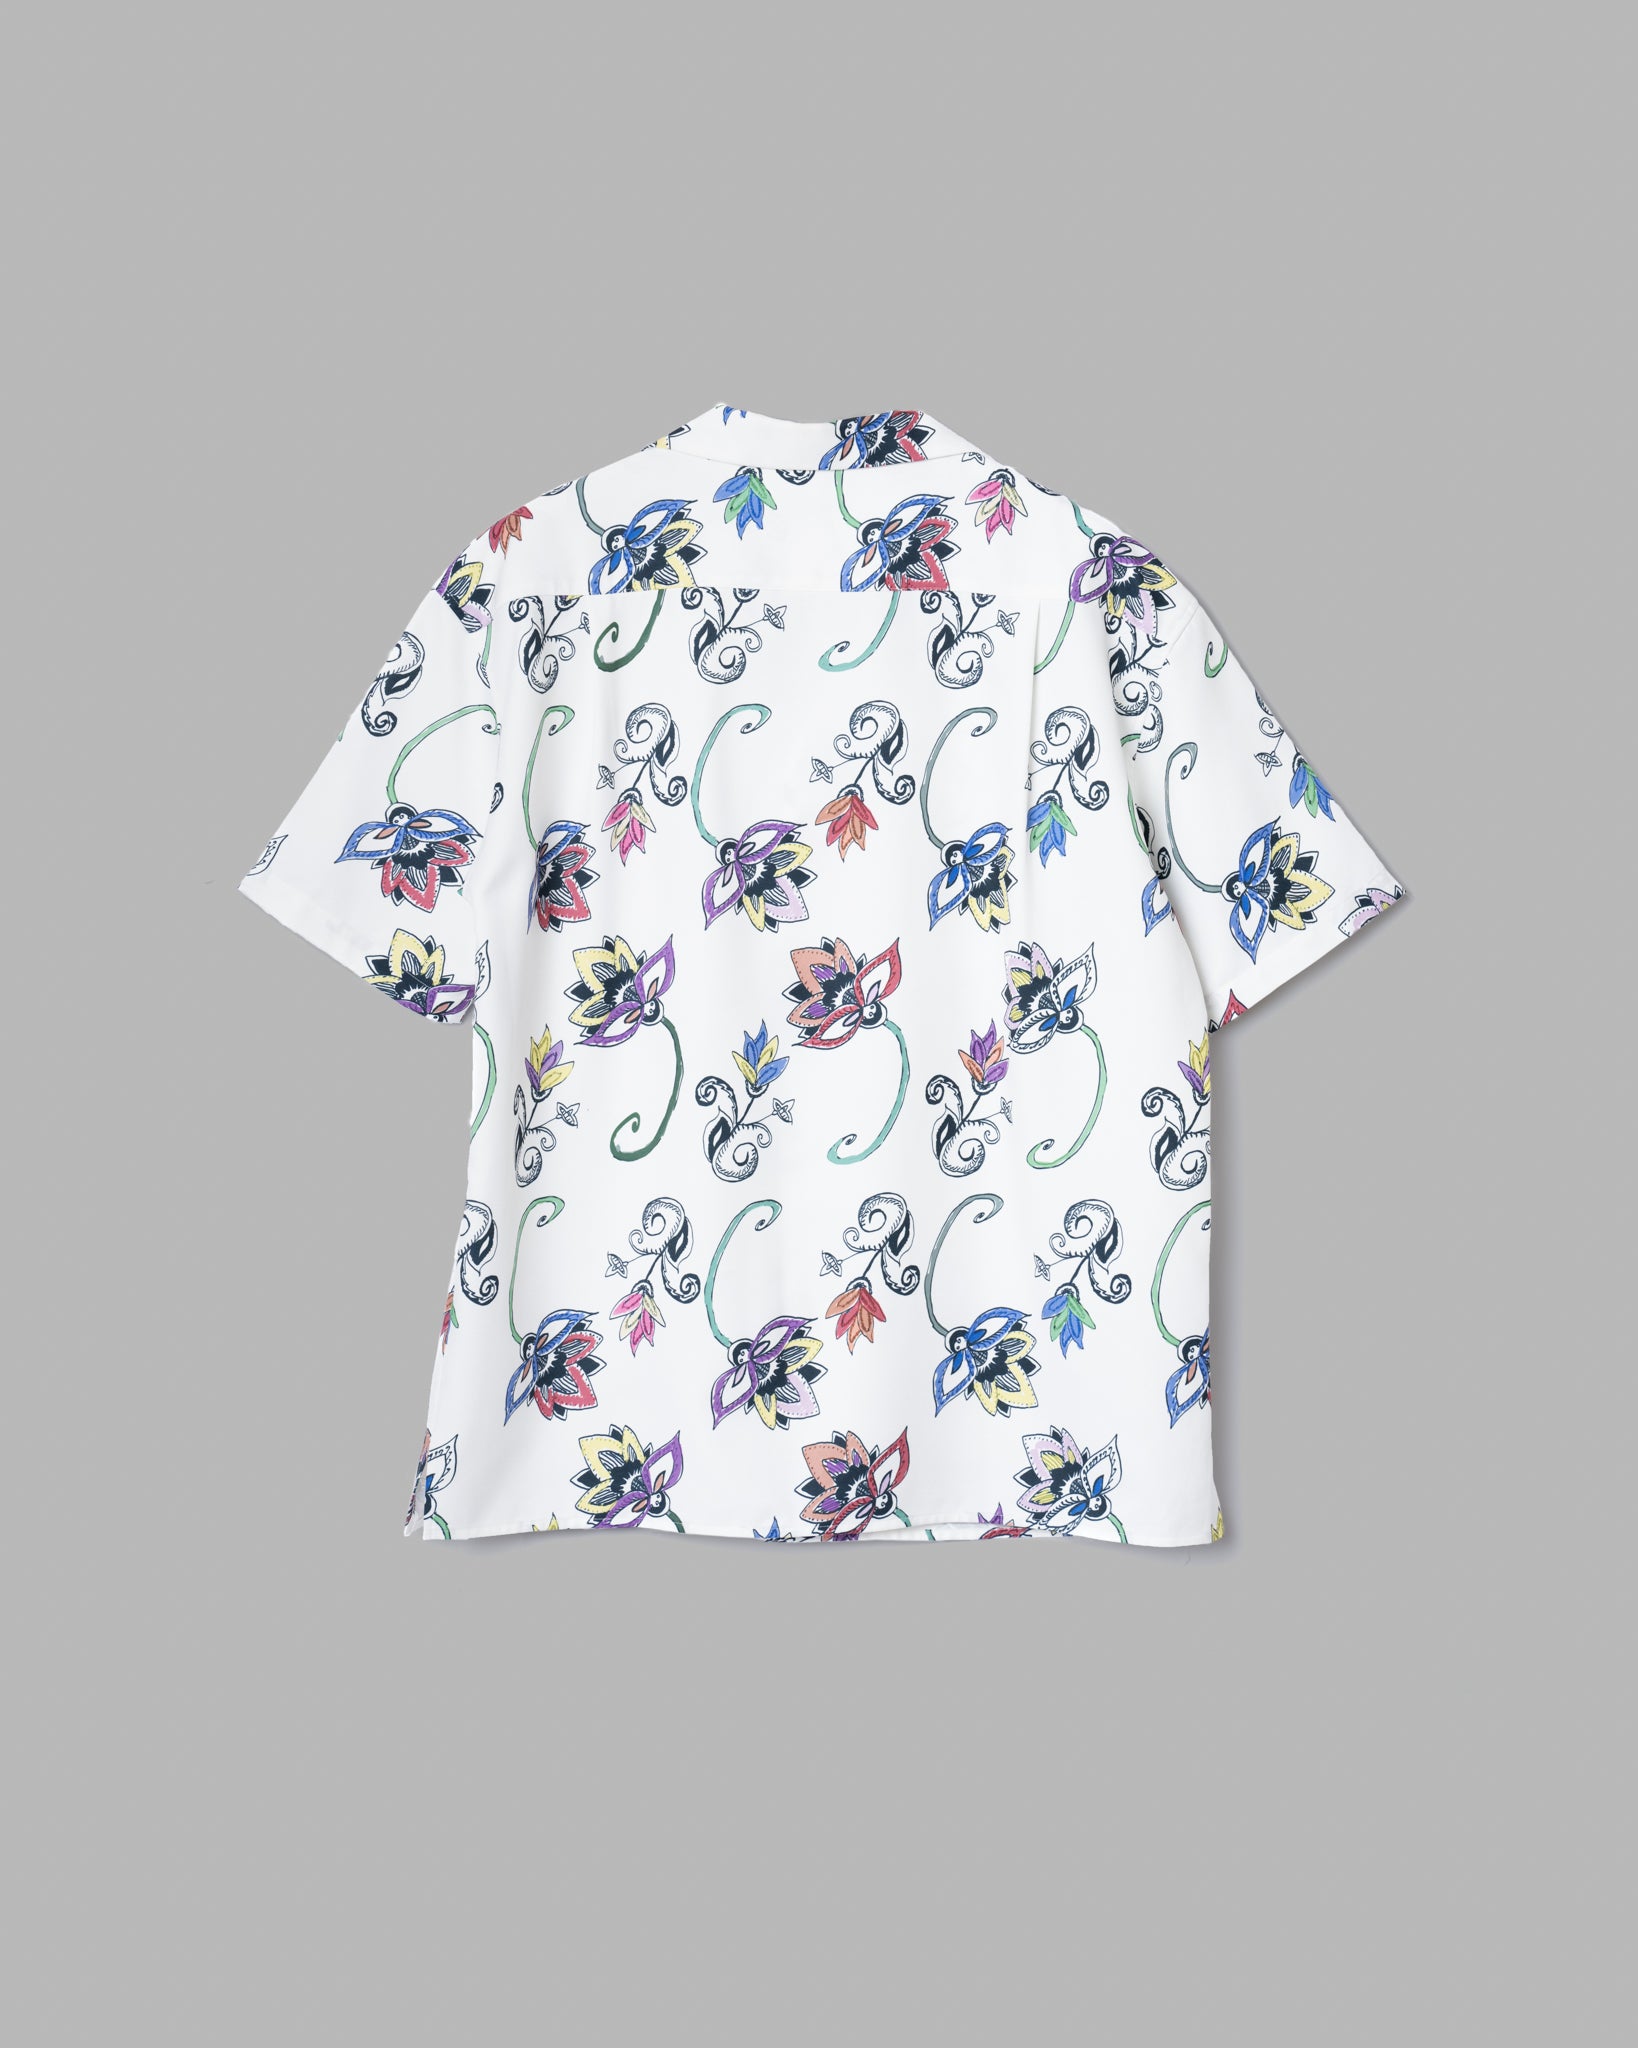 [Reservation sale] Hand -Painted Botanical Print Open Collar Shirts -White